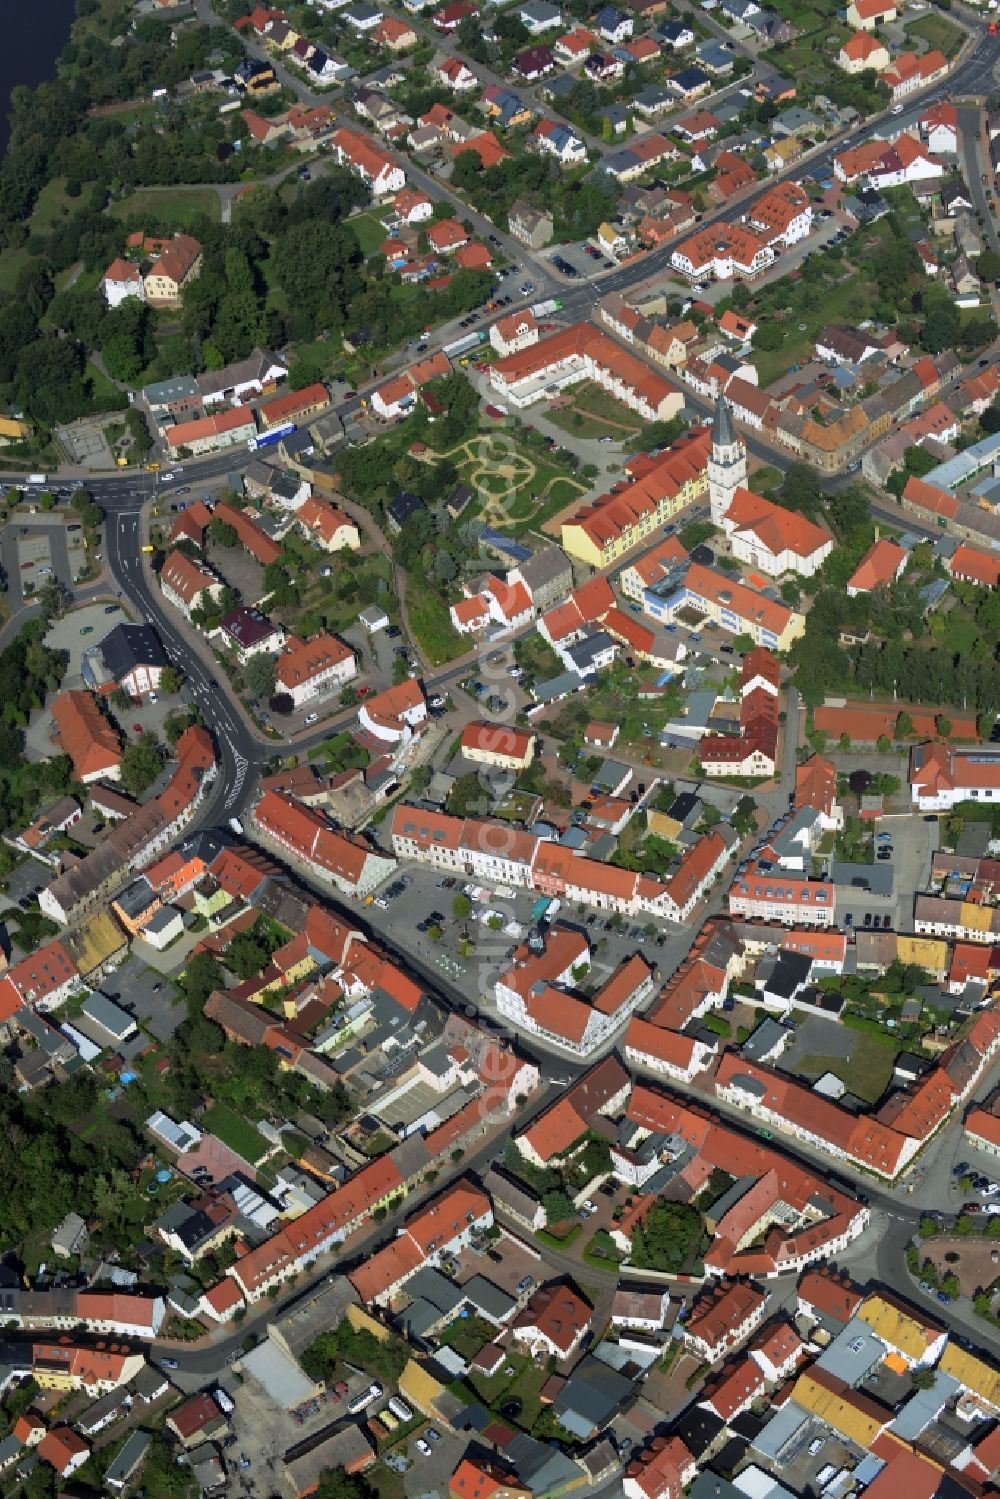 Bad Düben from above - View of the historic town centre of Bad Dueben in the state of Saxony. The spa town is located in the county district of North Saxony at the Duebener Heide region. Business and residential buildings are located in its centre, along with tourist attractions and parks